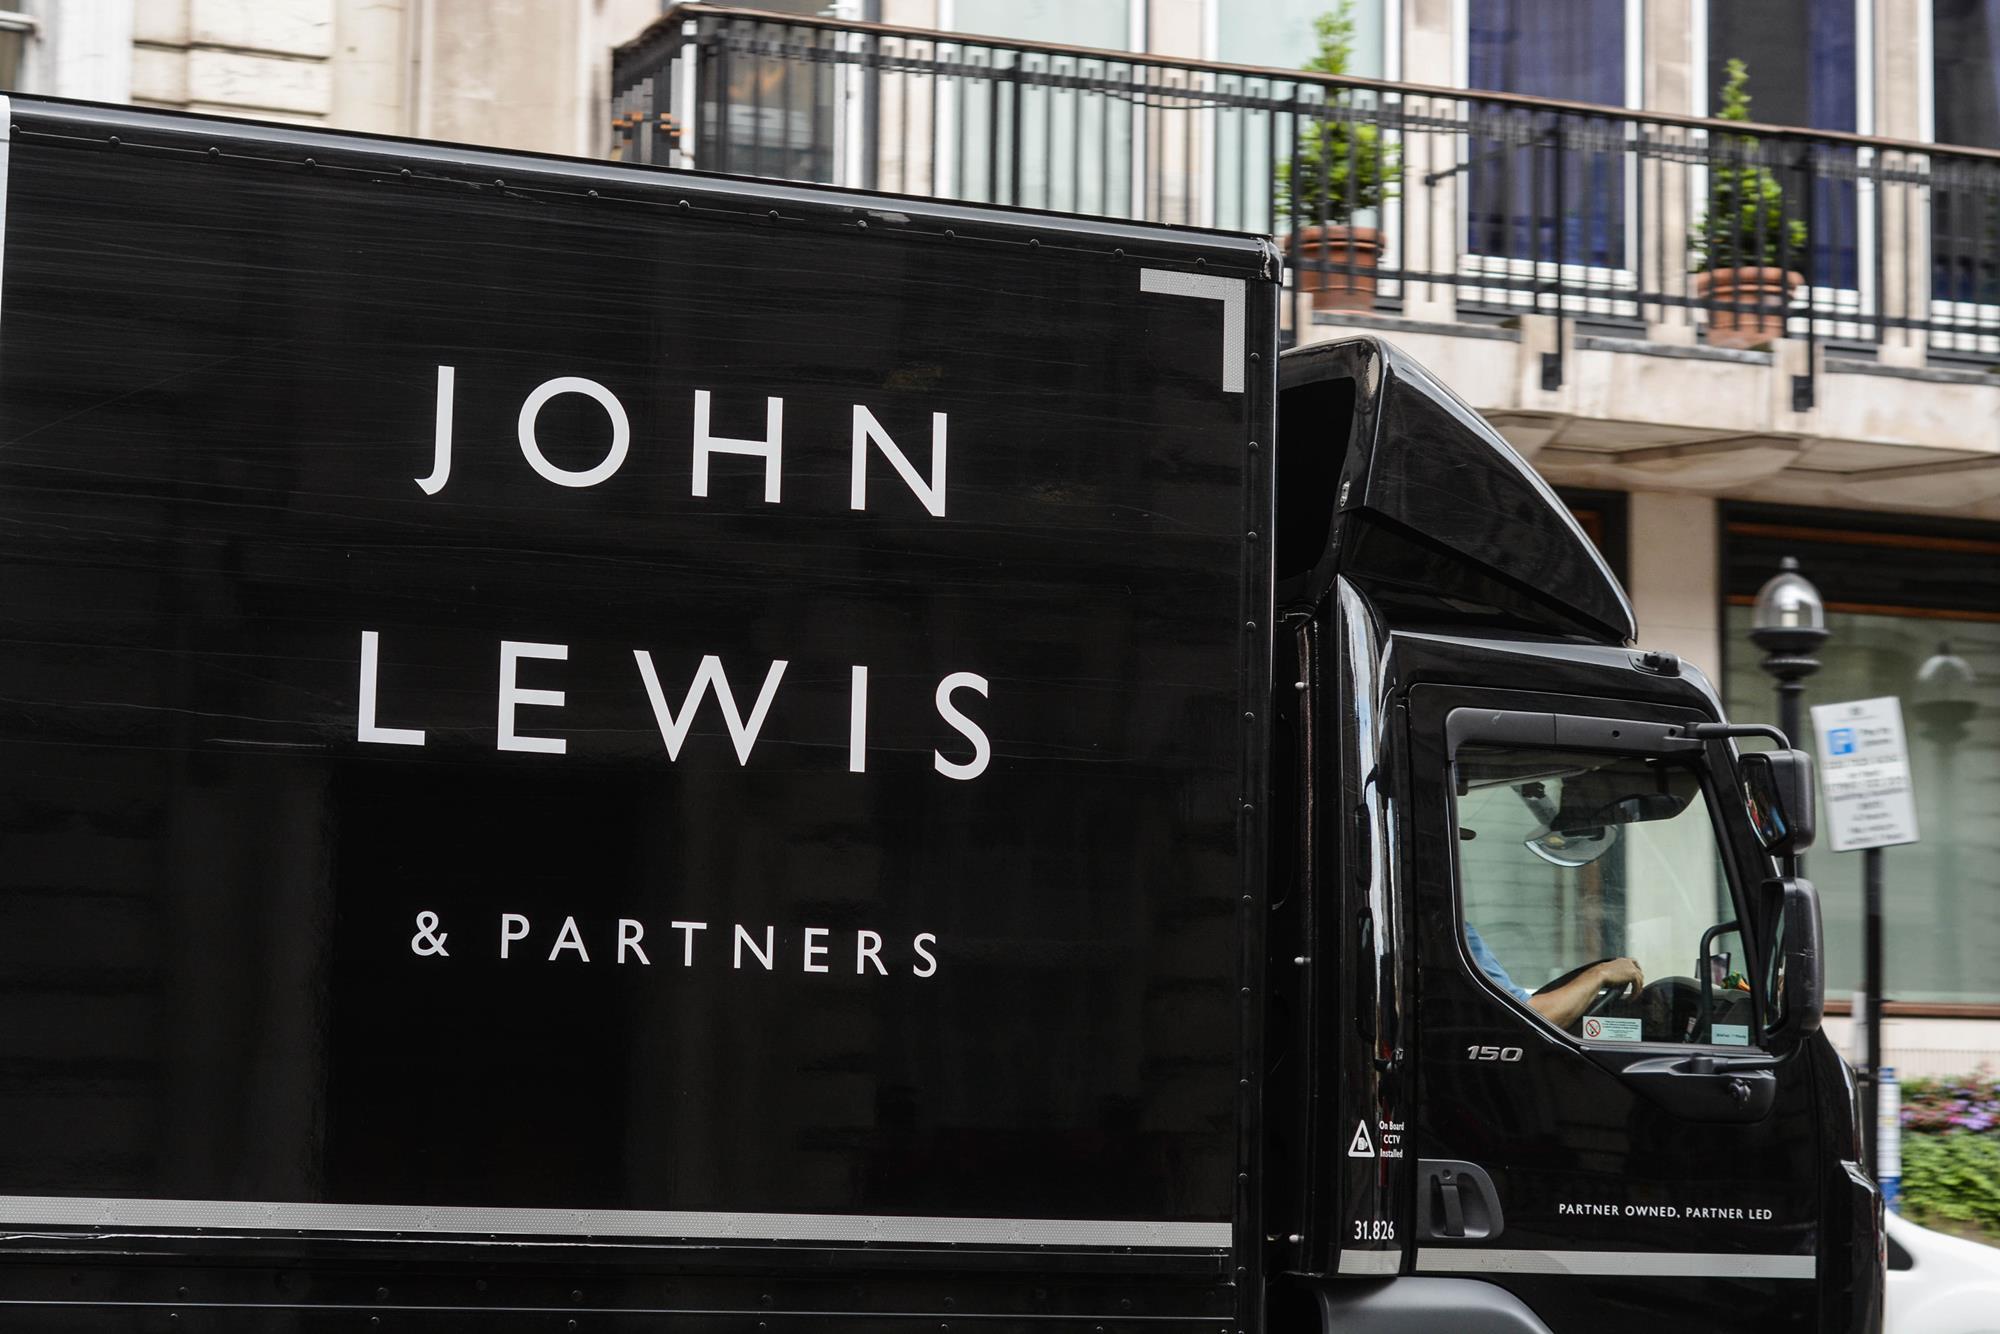 John Lewis extends its same day delivery service – ERT